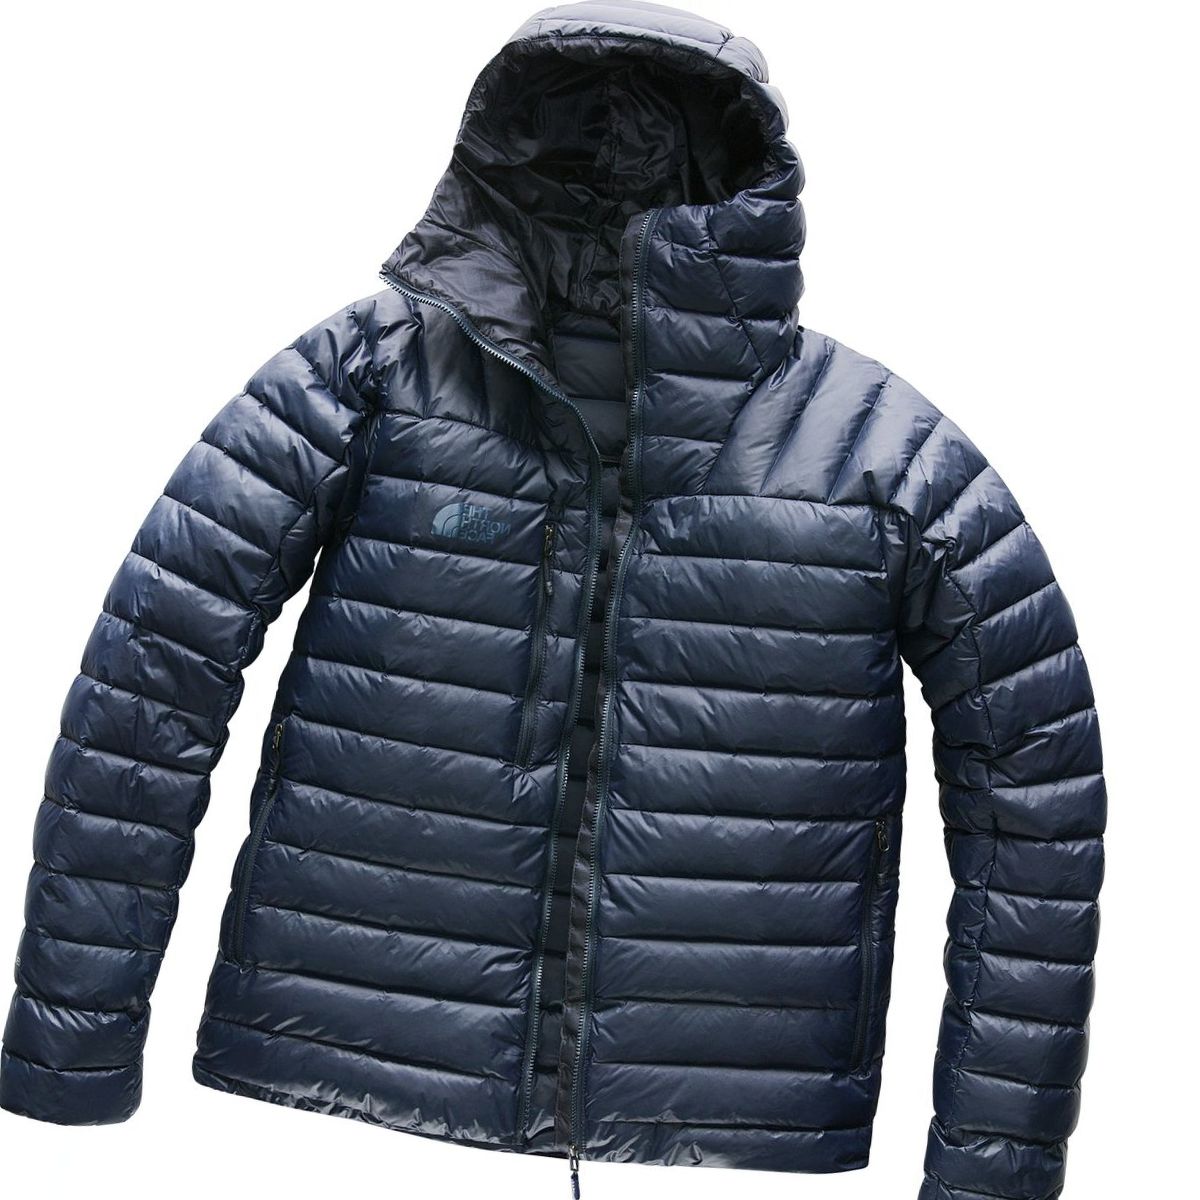 The North Face Morph Hooded Down Jacket - Men's